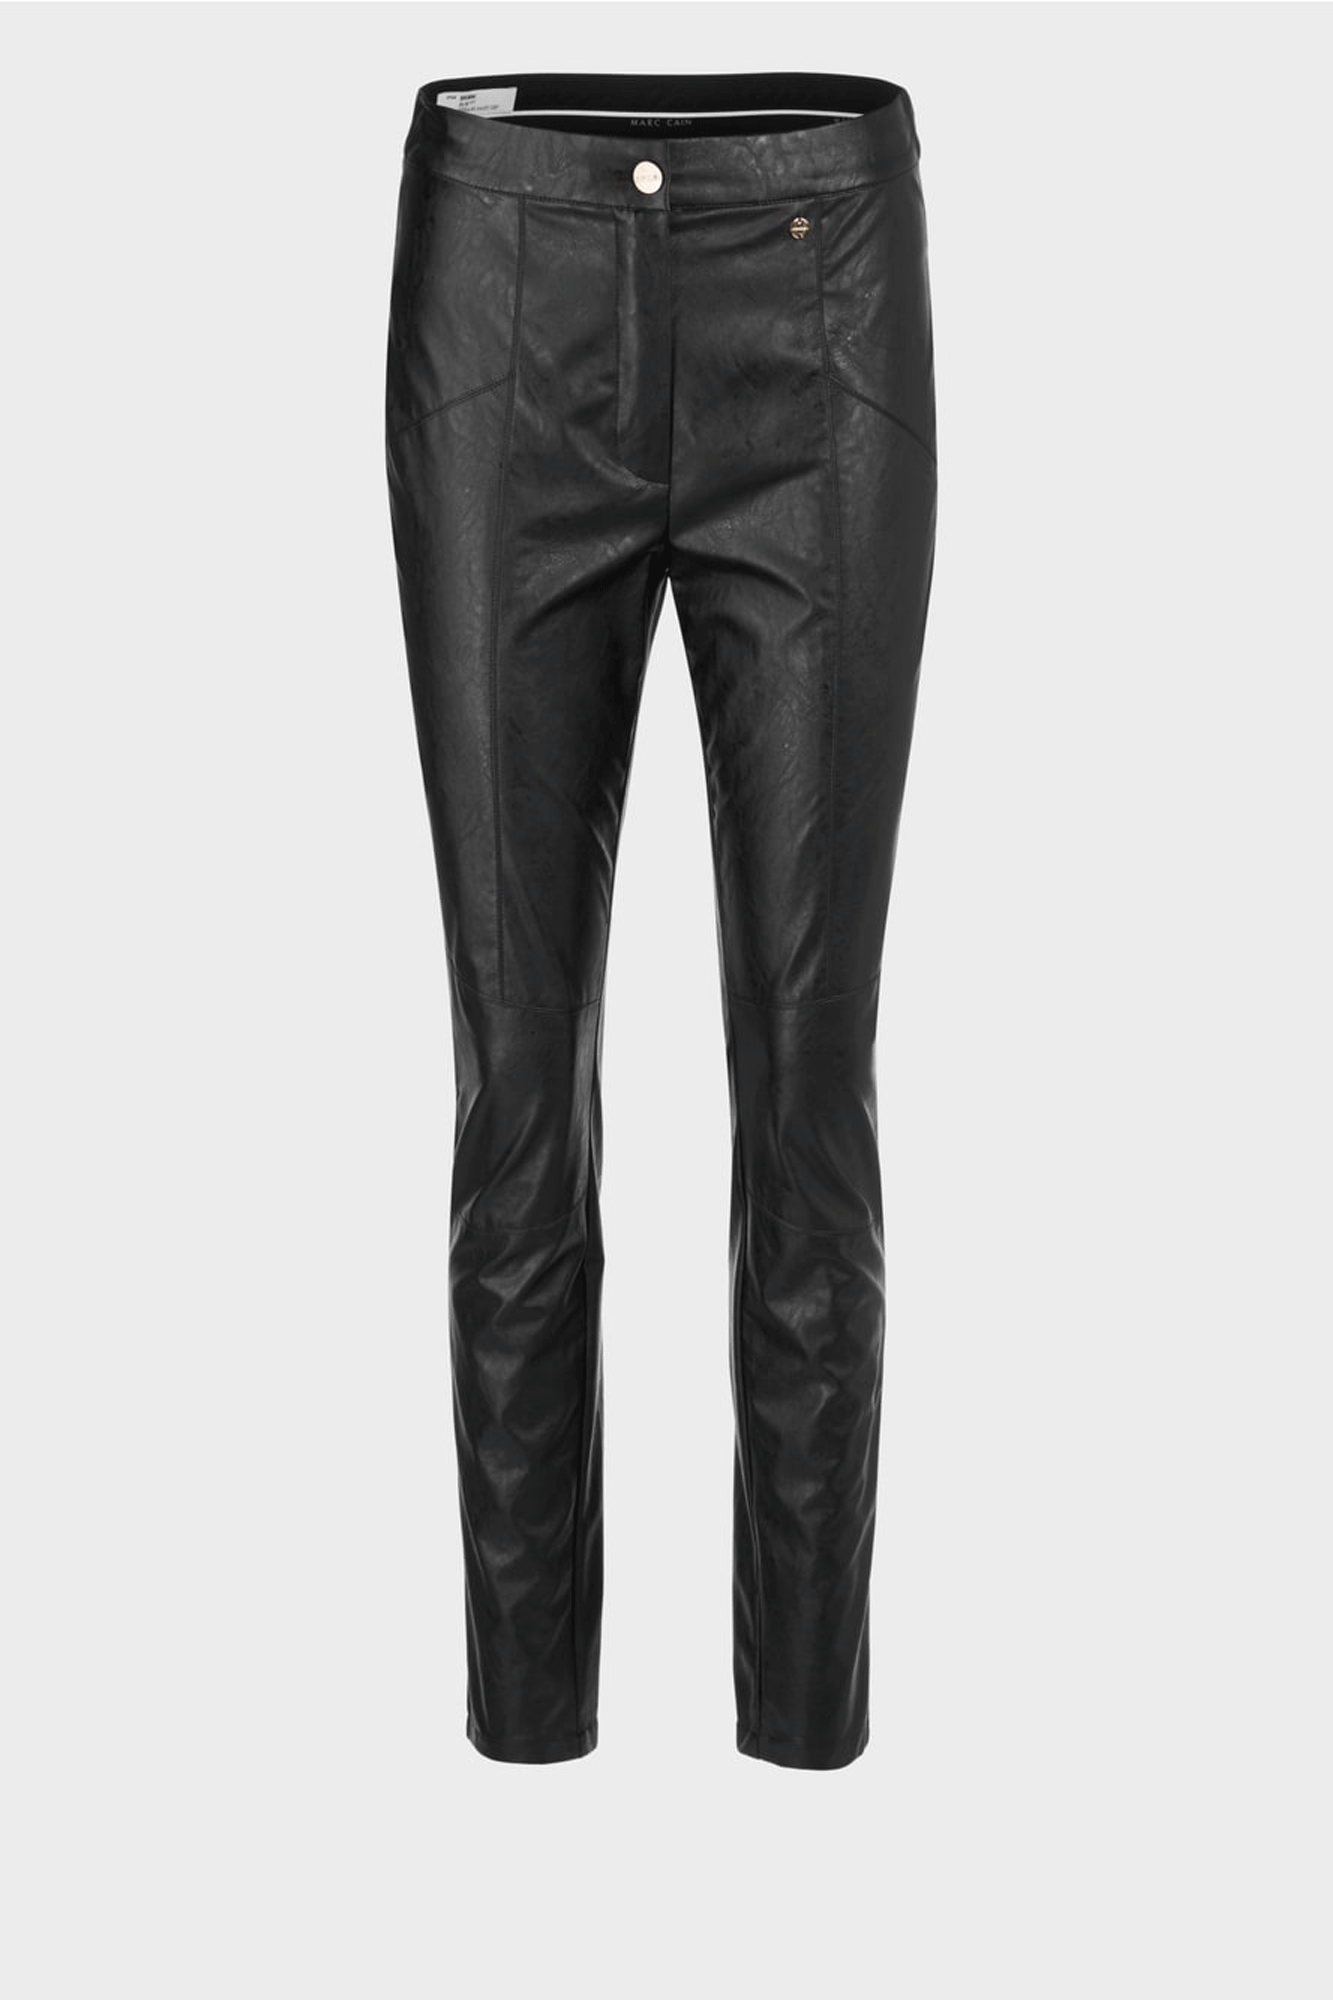 These sophisticated Velvet & Jacquard Slim Pants feature a high-quality velvet and jacquard material, giving them a sleek leather look. With a slim fit design and high waistband, the pants provide both style and comfort. Matching decorative stitching on the leg and pockets complete the look.